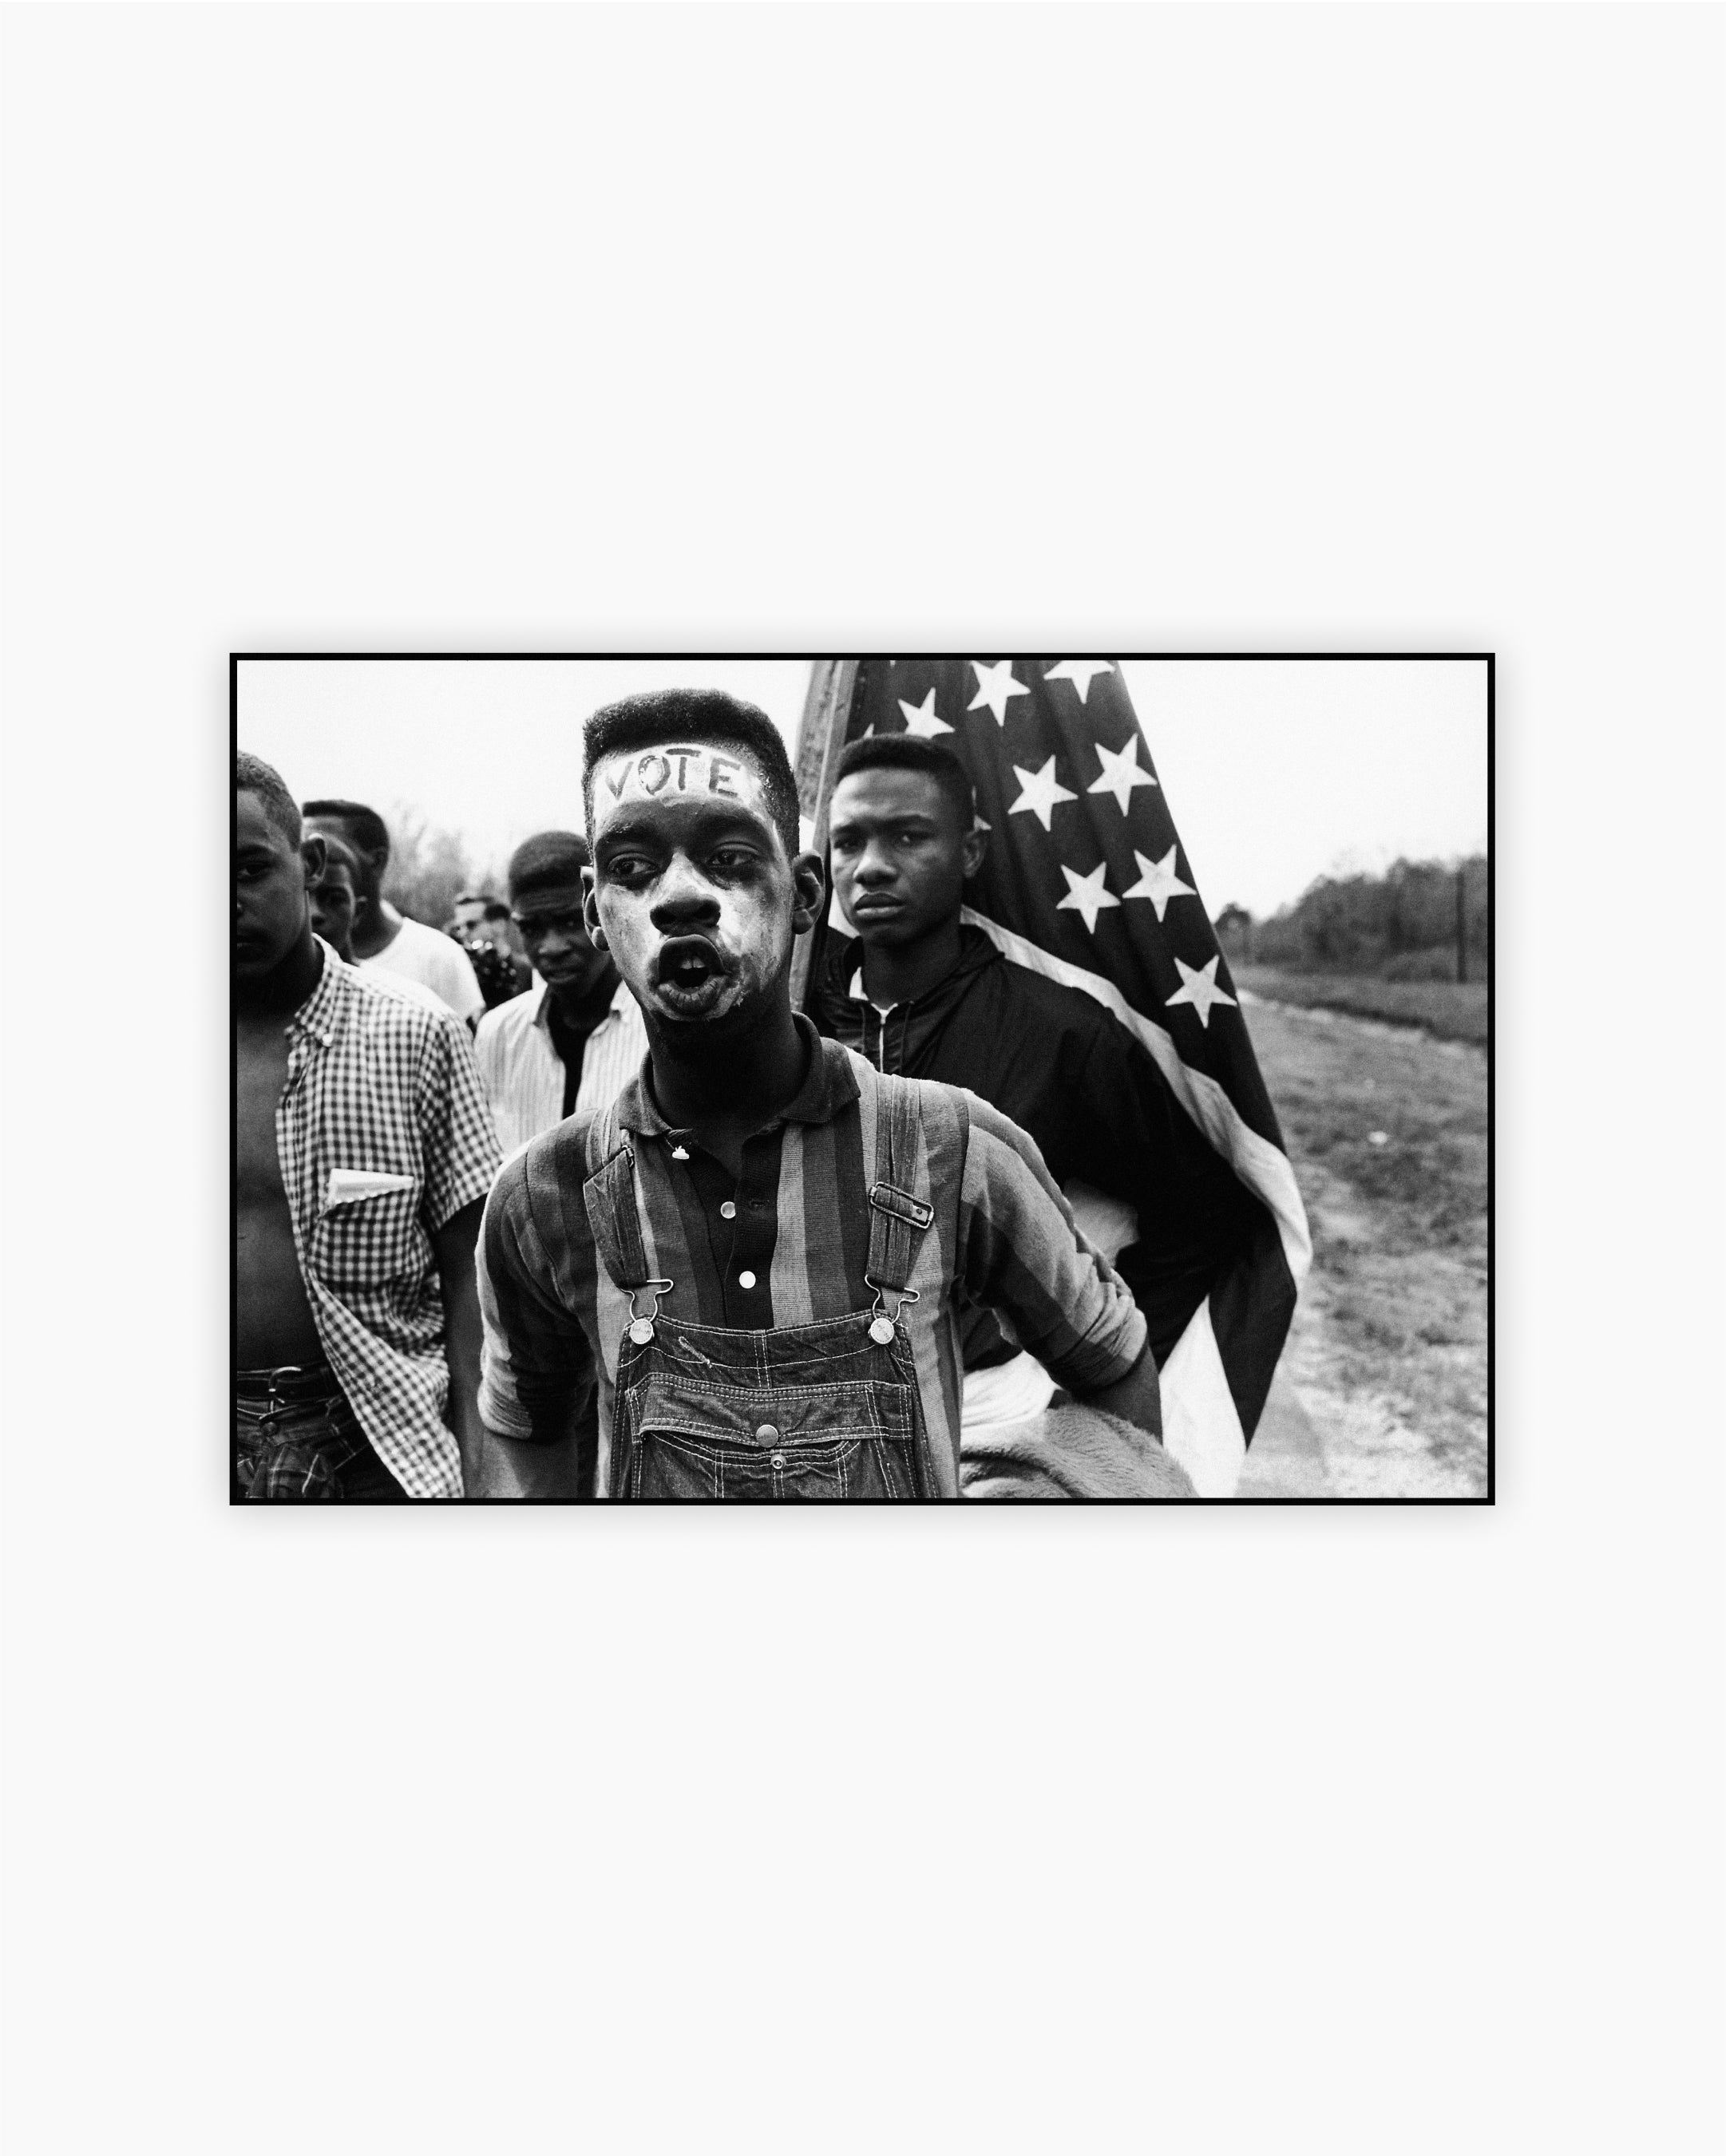 Civil rights march from Selma to Montgomery. Alabama, USA, 1965